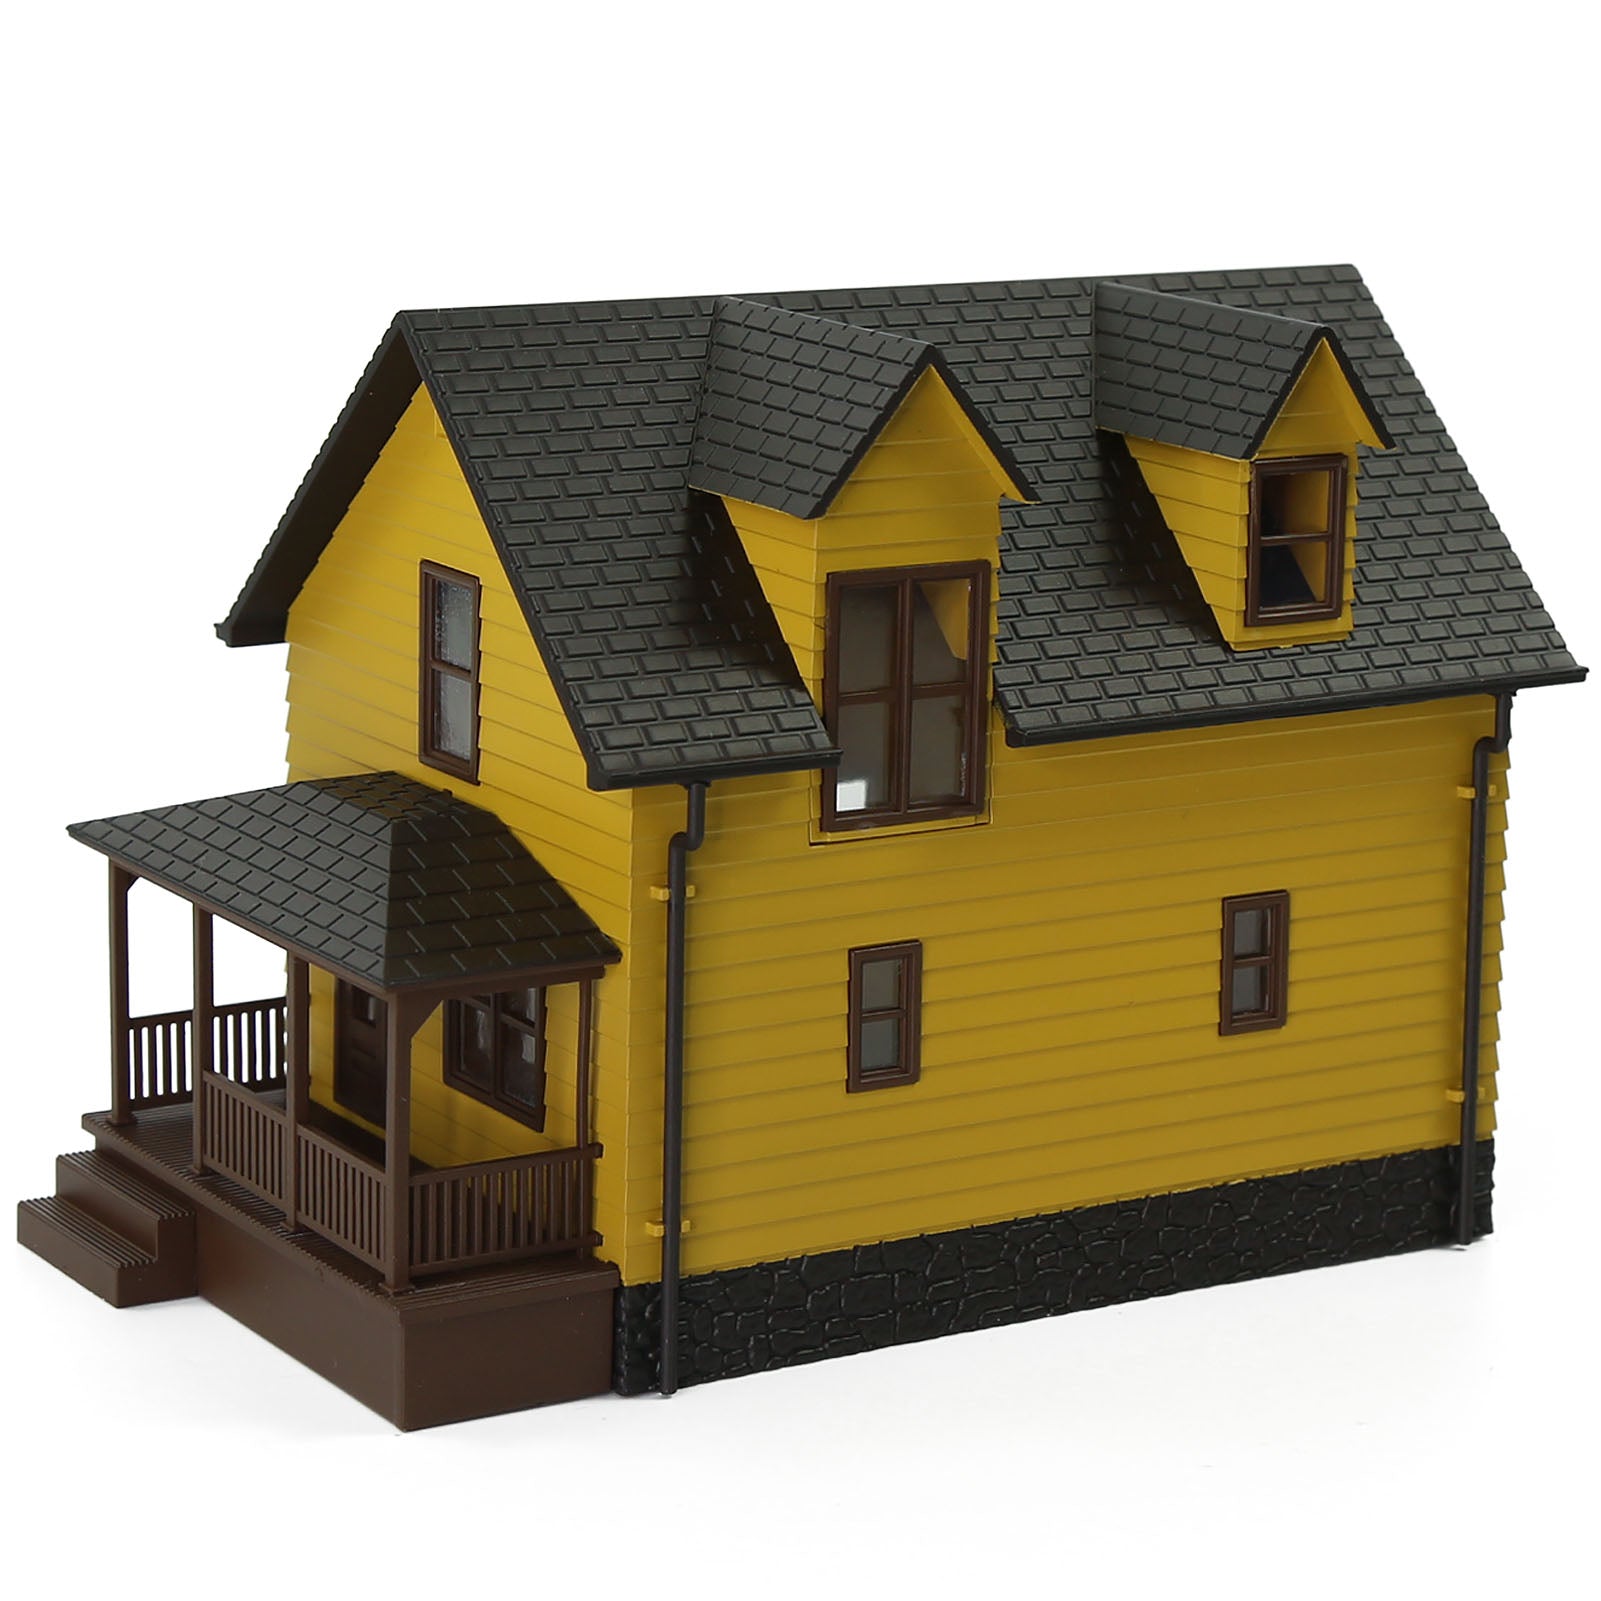 JZN01 1pc N Scale 1:160 Model House Residential Building Architectural